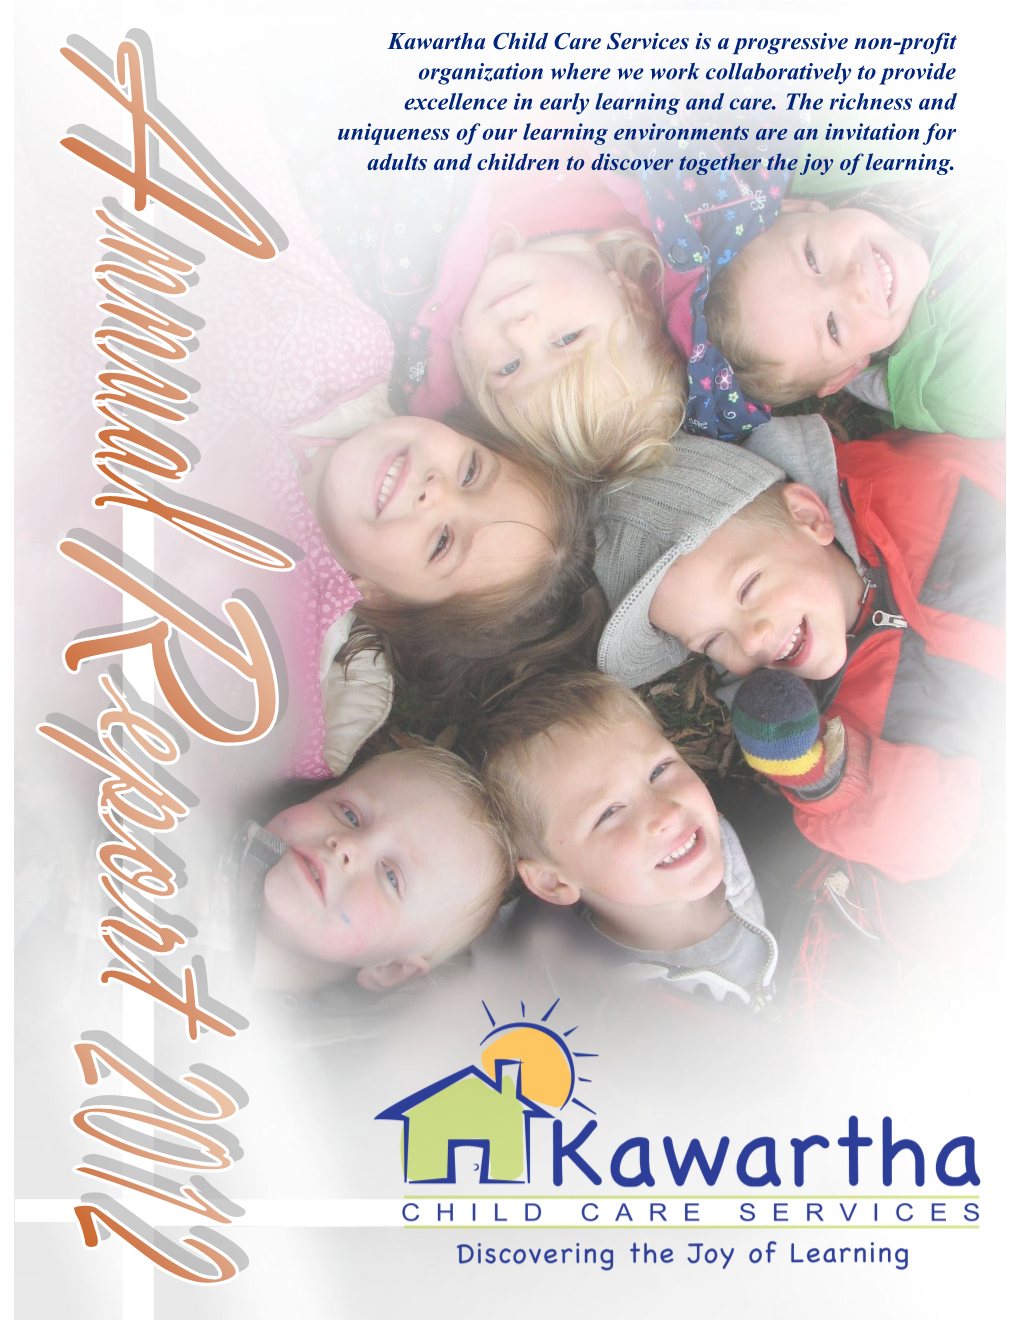 Kawartha Child Care Services Is a Progressive Non-Profit Organization Where We Work Collaboratively to Provide Excellence in Early Learning and Care